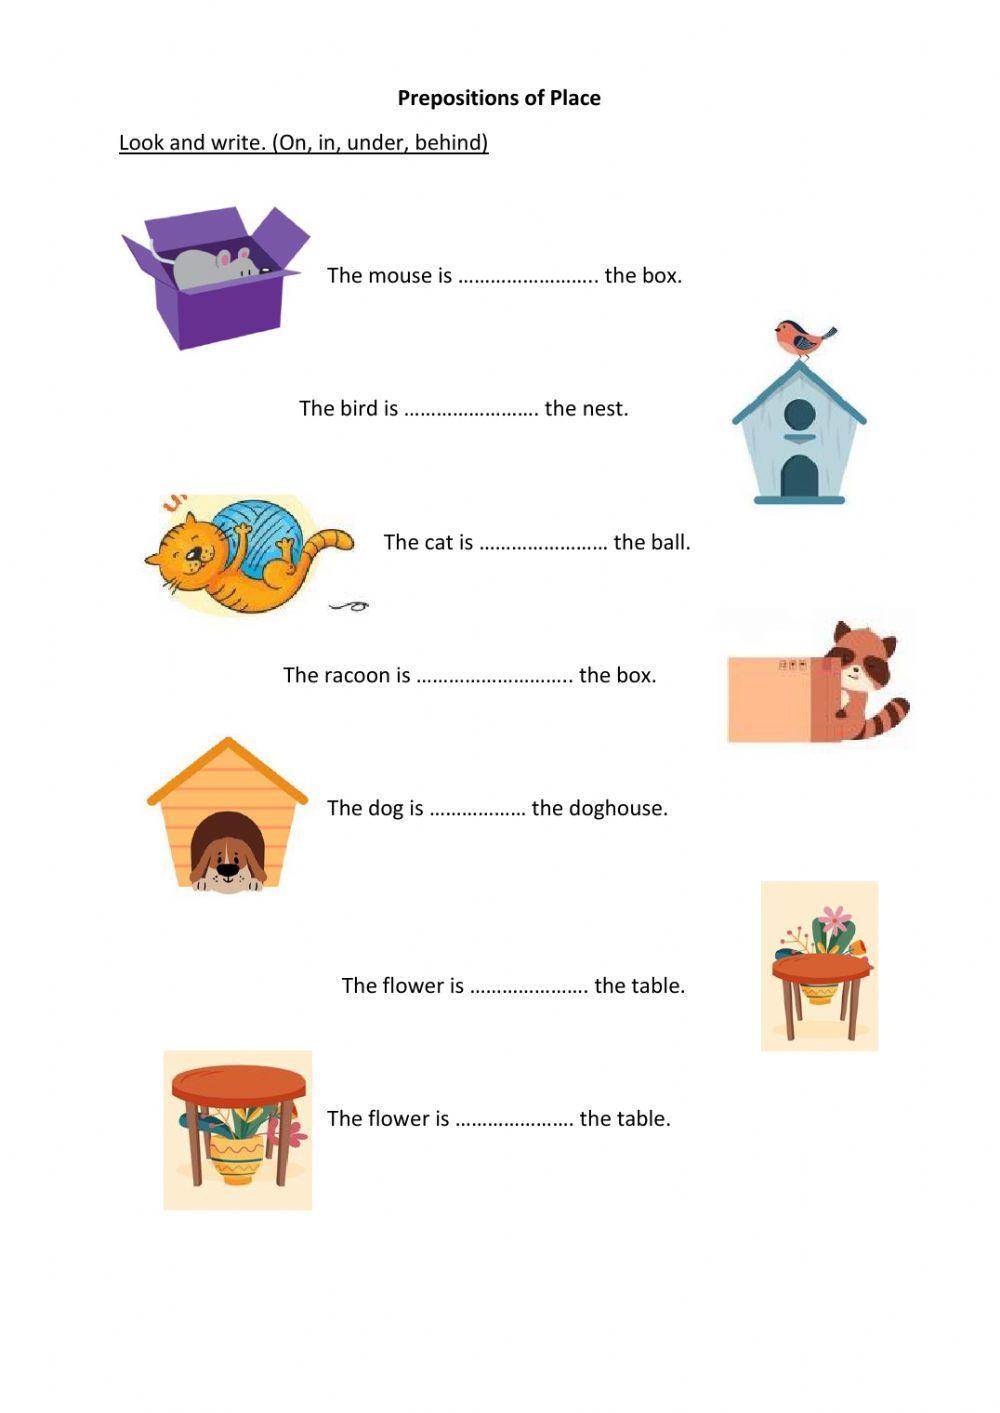 Prepositions of Place (in, under, behind, on)